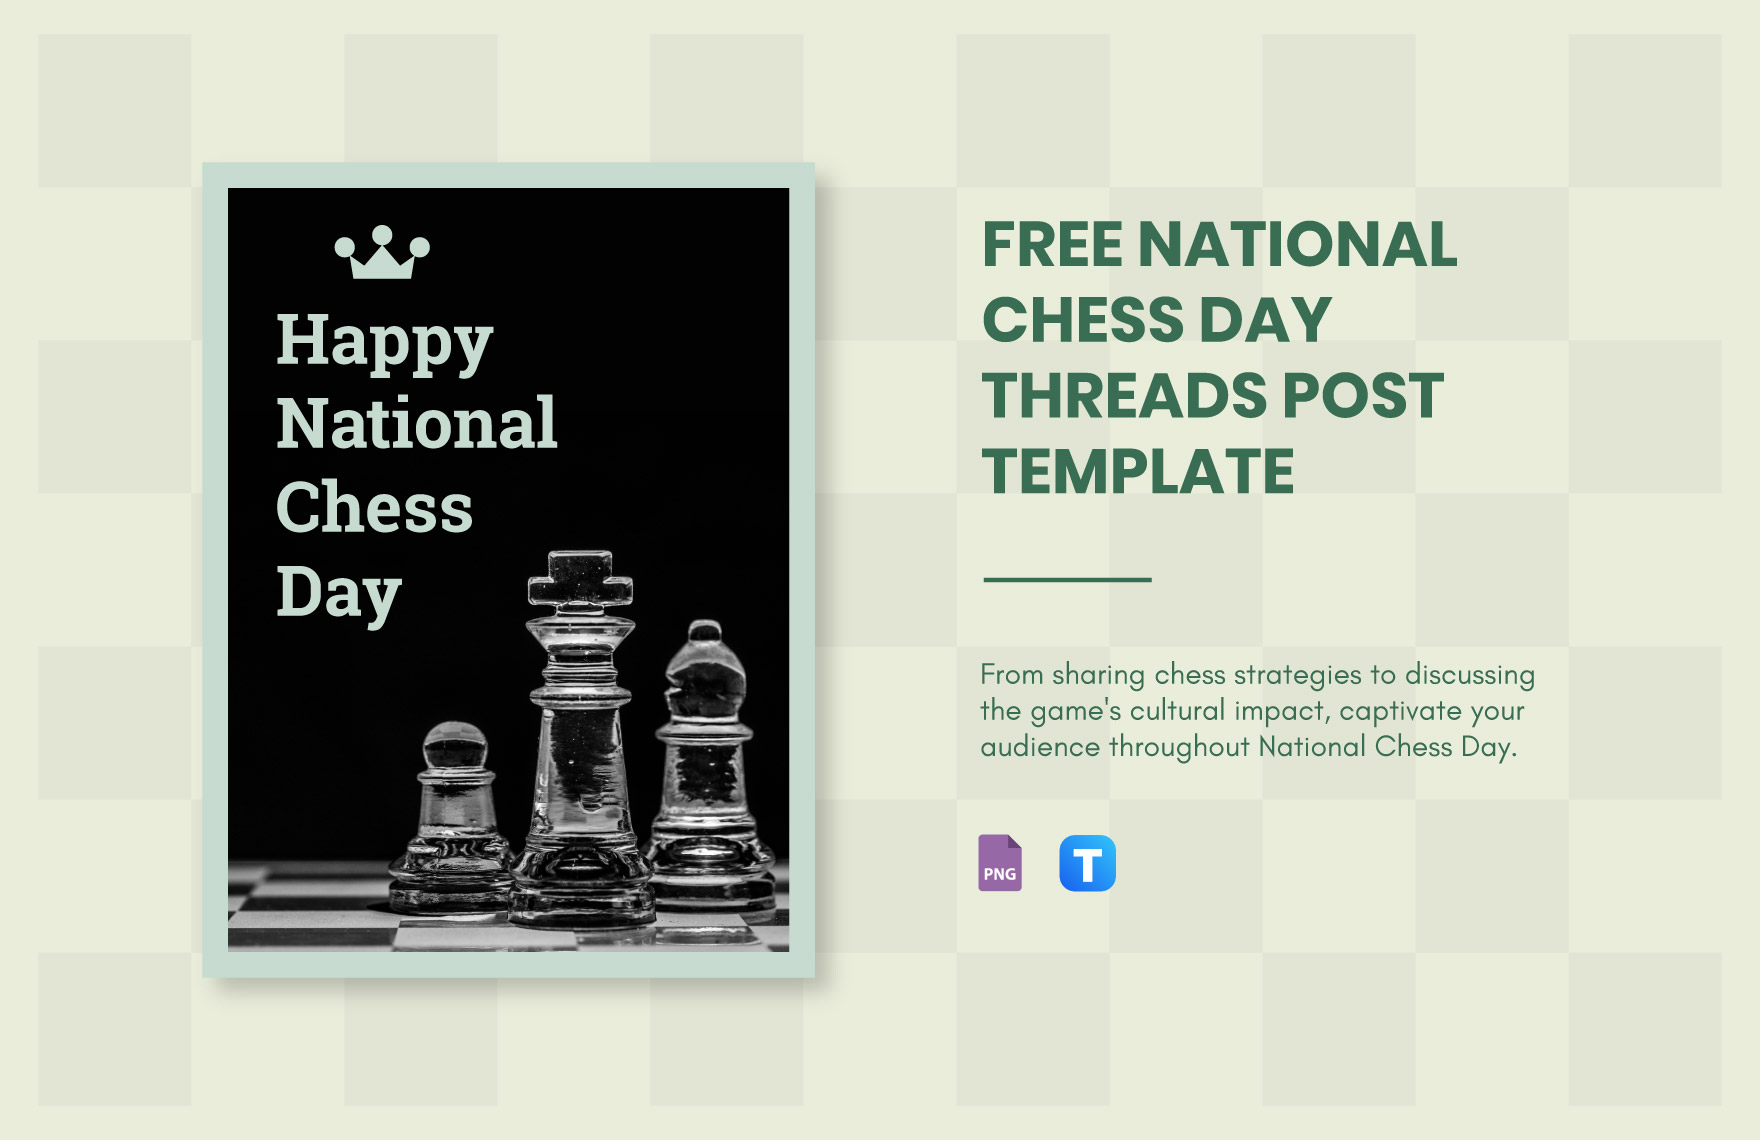 Free National Chess Day Threads Post Template in PNG